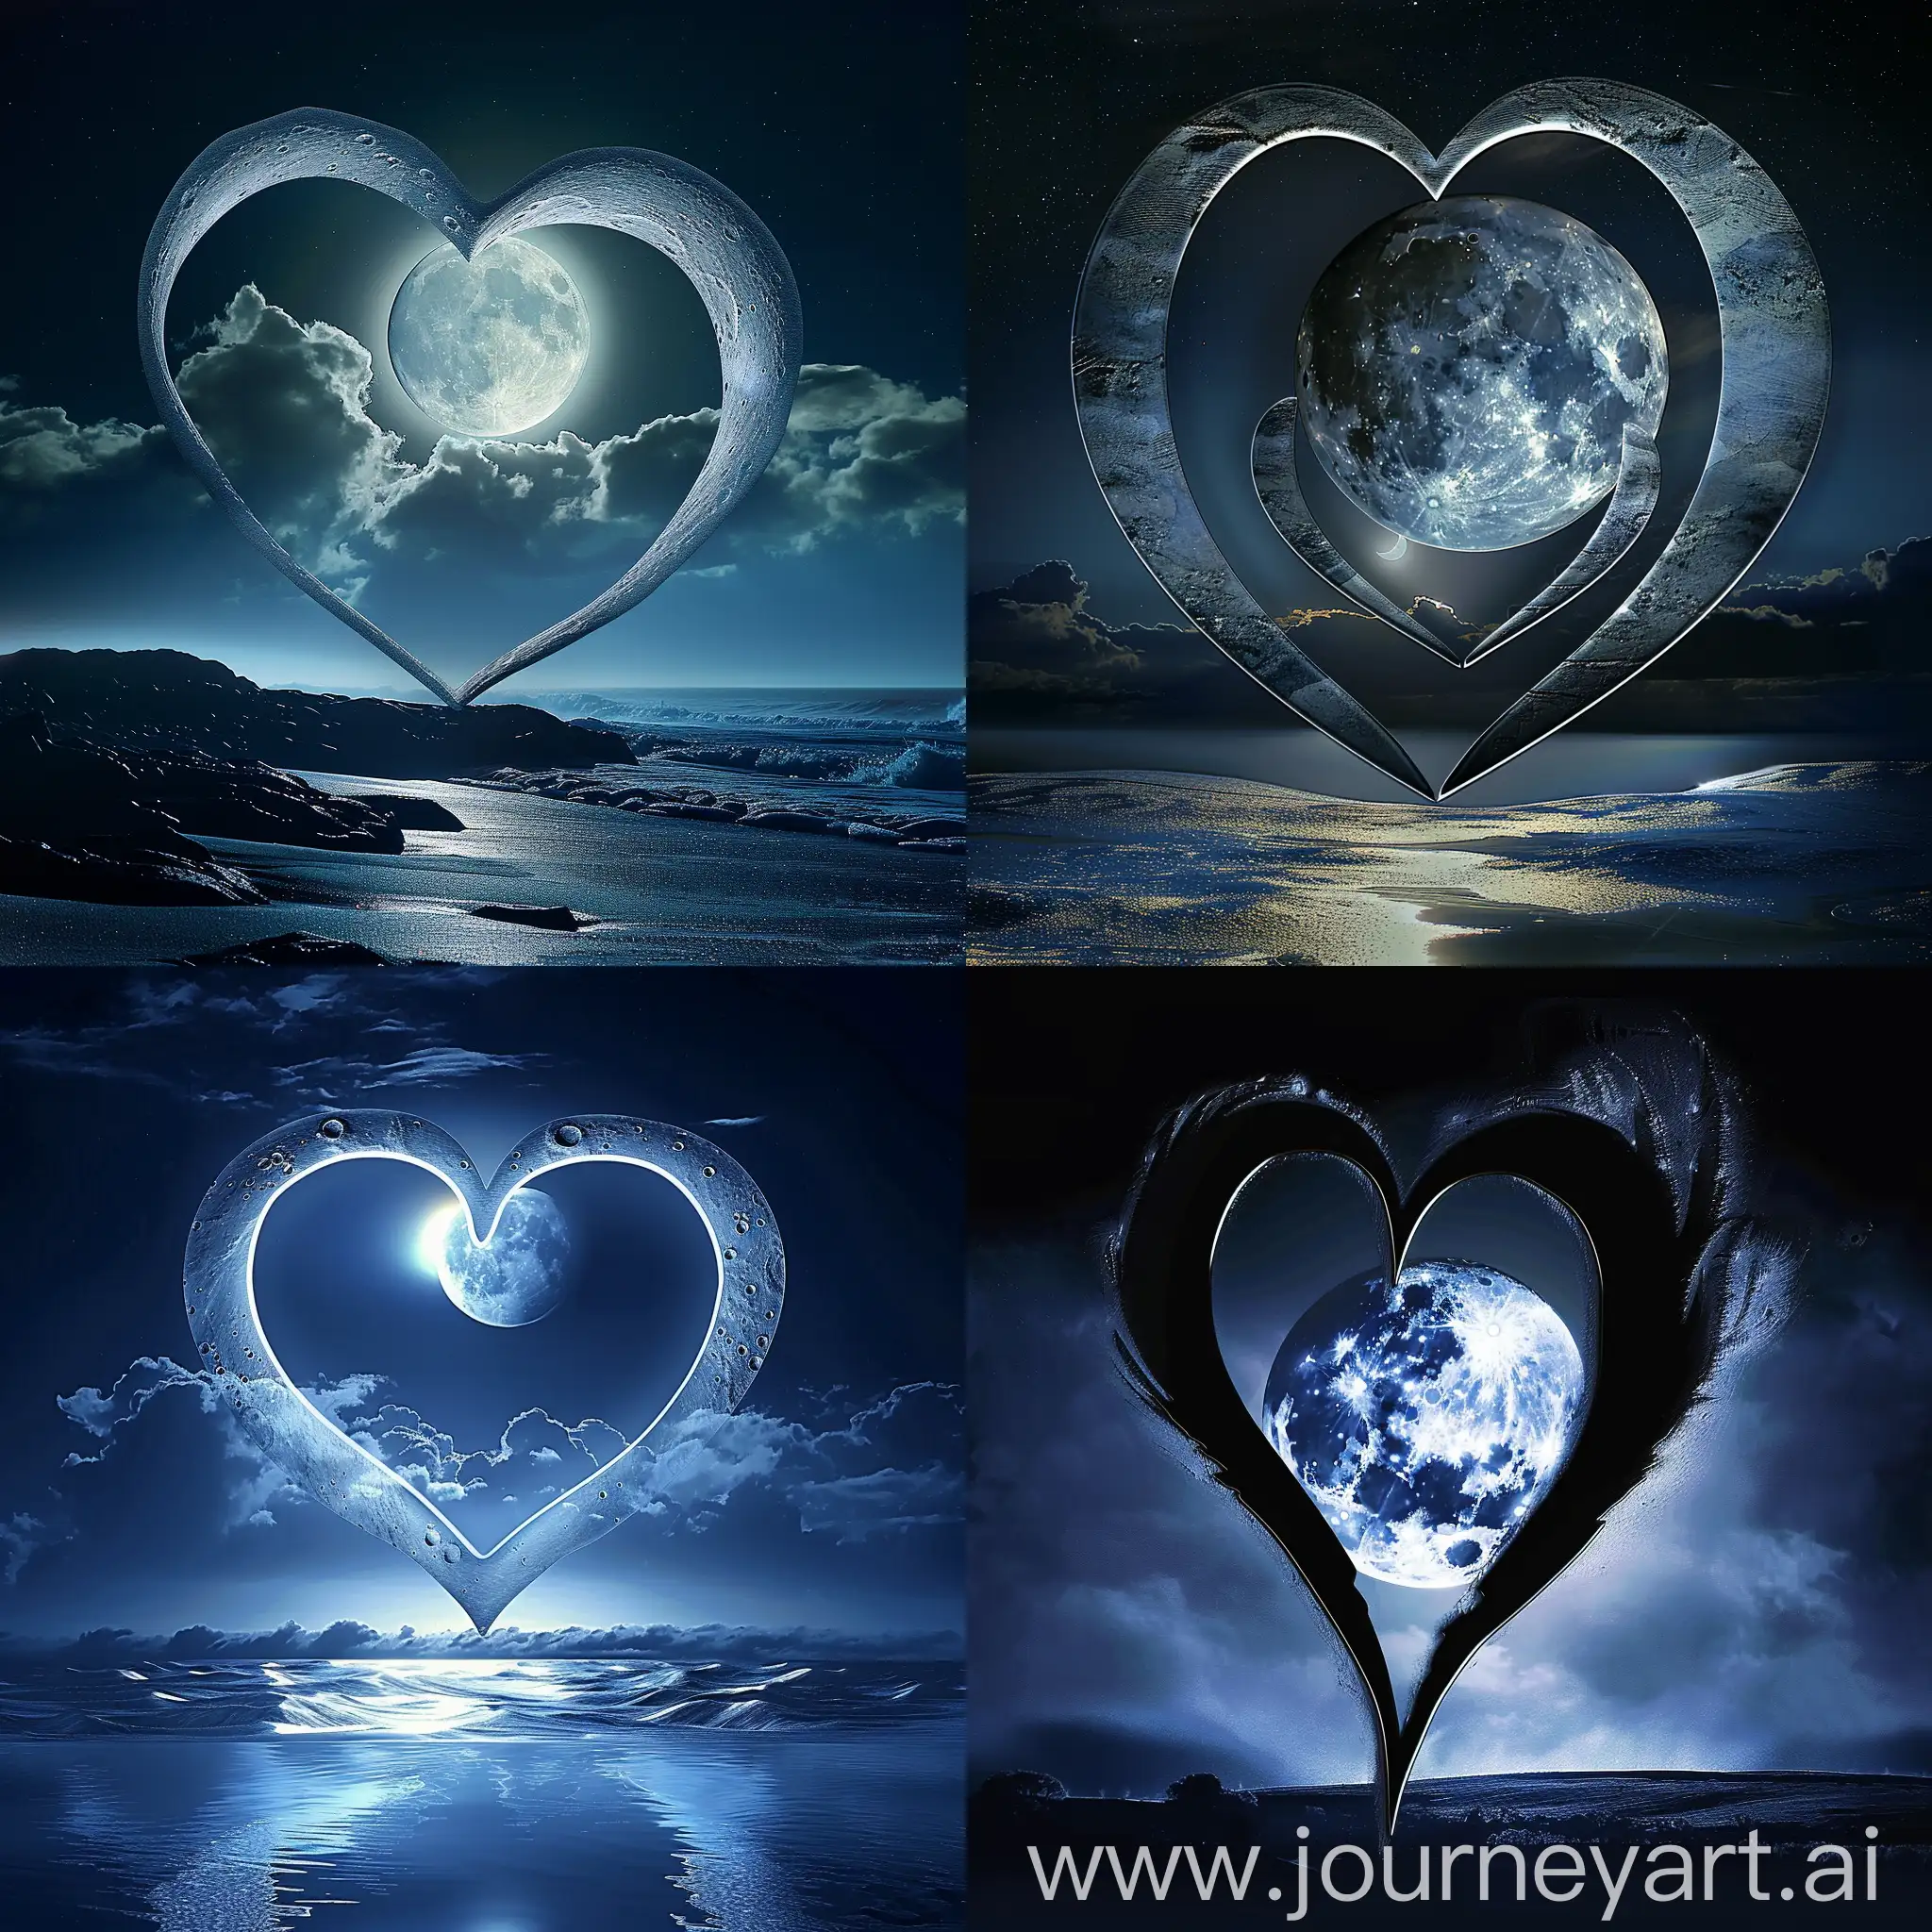 Ethereal-Moonlit-Night-HeartShaped-Silhouette-with-Radiant-Moon